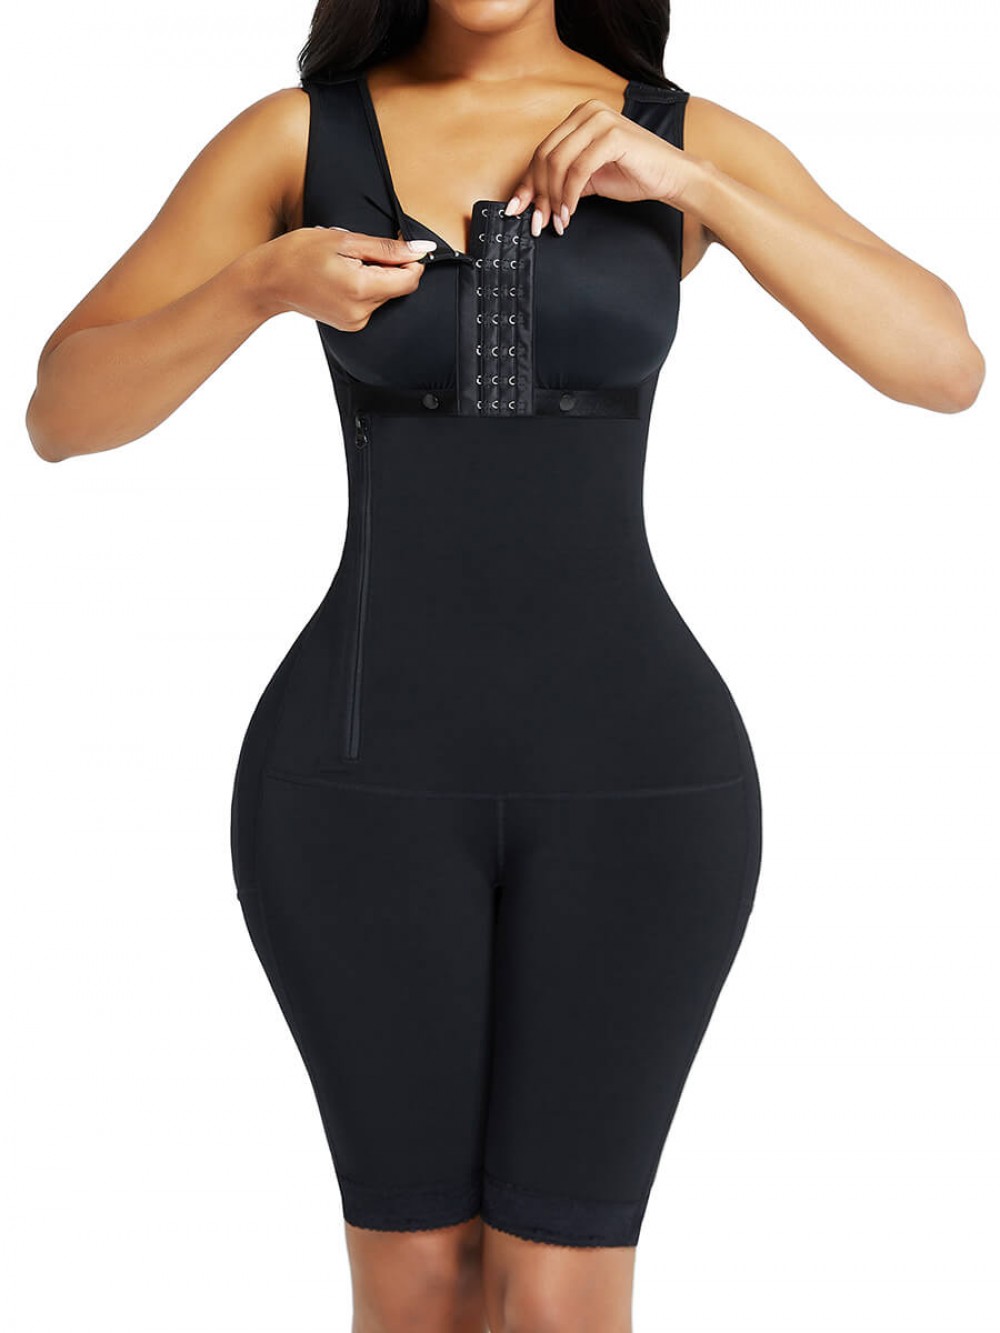 Black Smooth Silhouette Butt Lifter Shapewear Supperfit Everyday Shaping Haute Contour